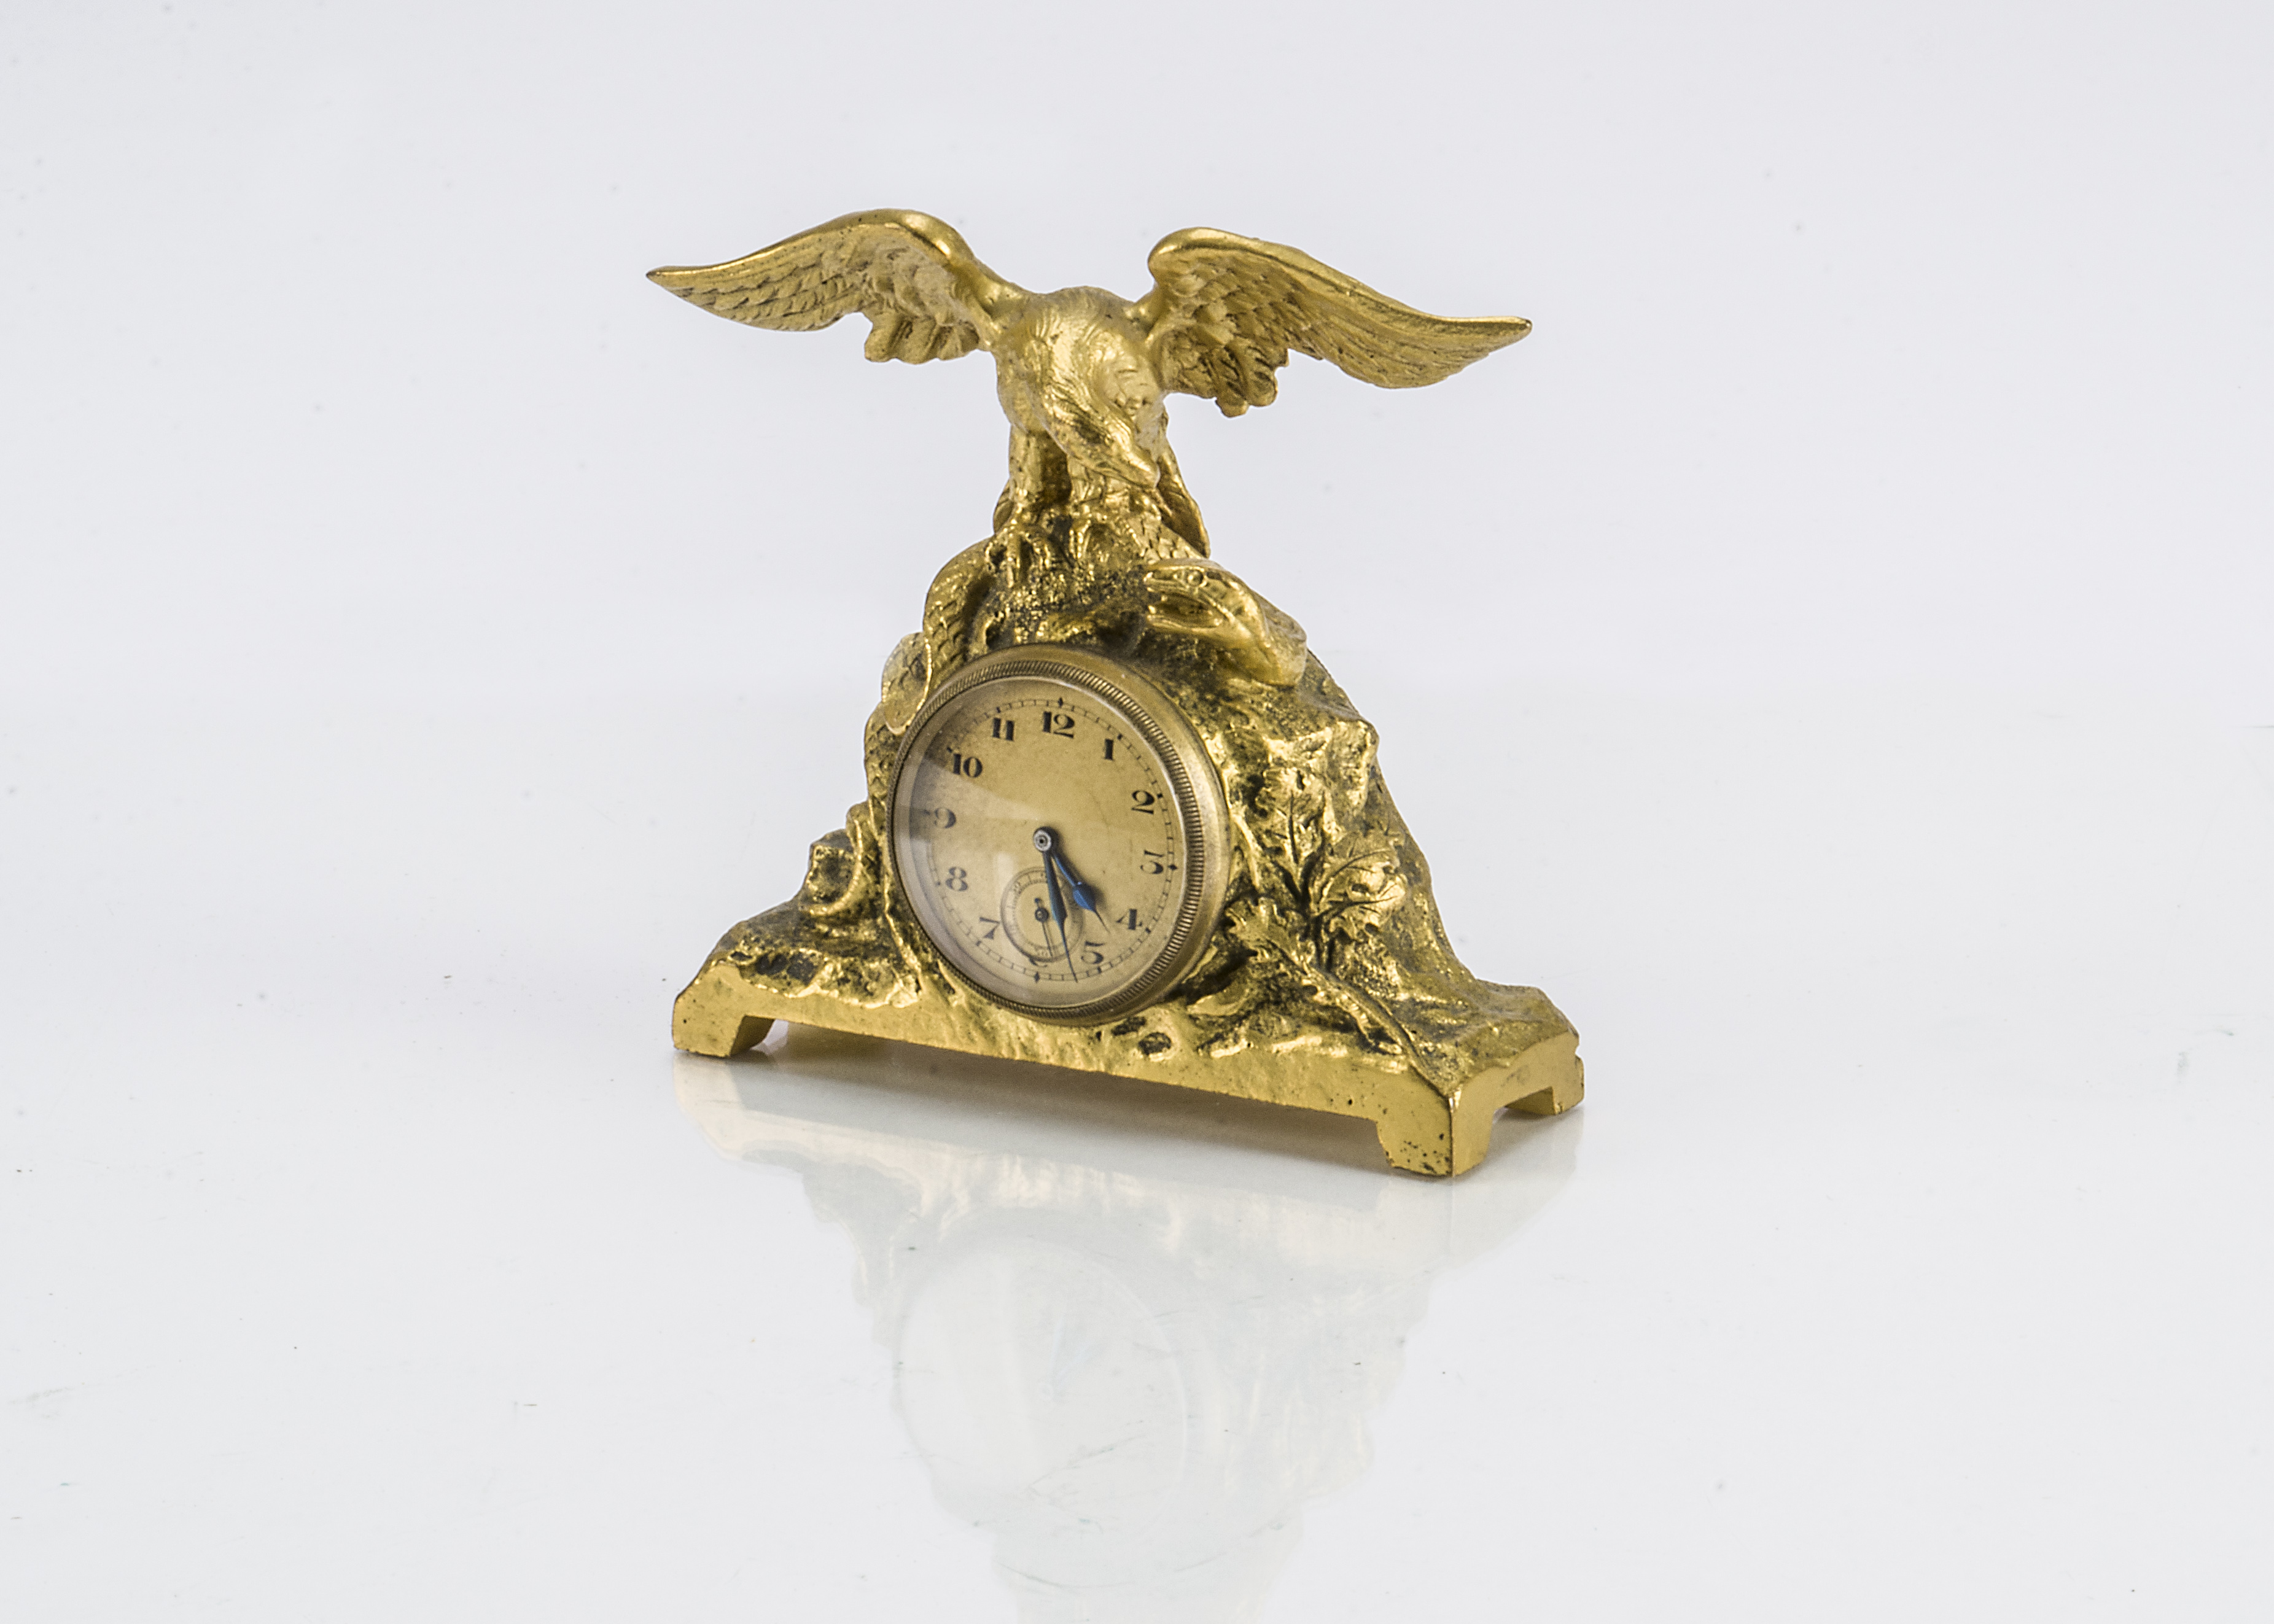 A small late 19th century French gilt clock, with eagle and snake on craggy base and inset watch